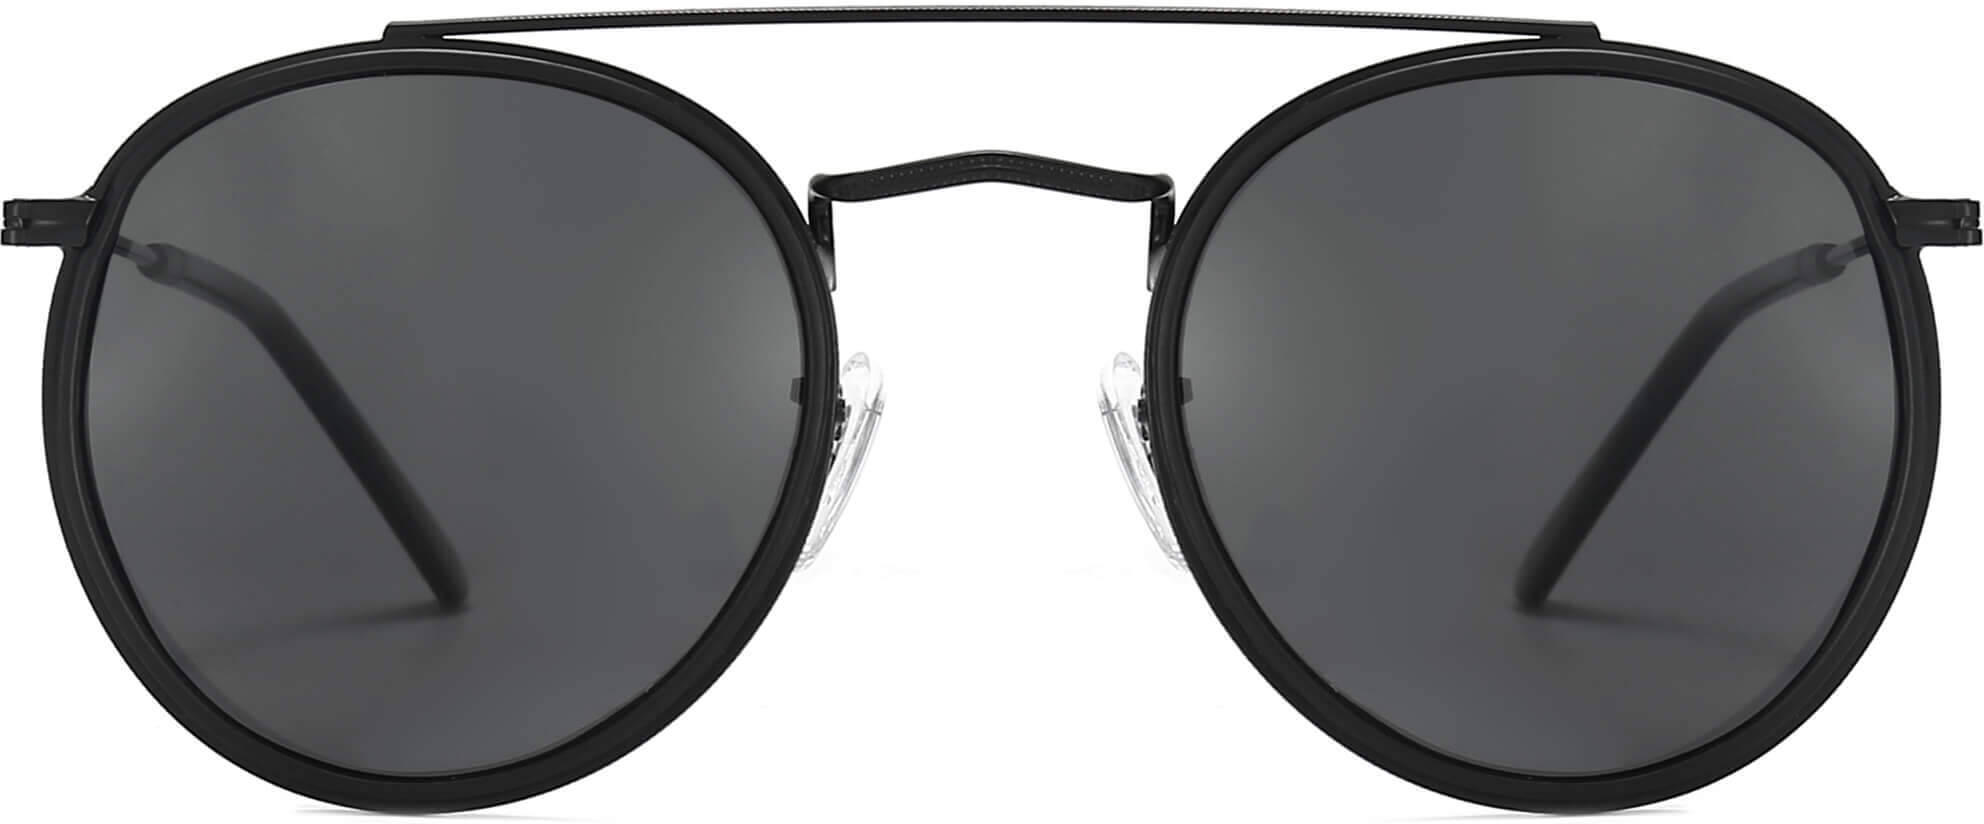 Karter Black Plastic Sunglasses from ANRRI, front view